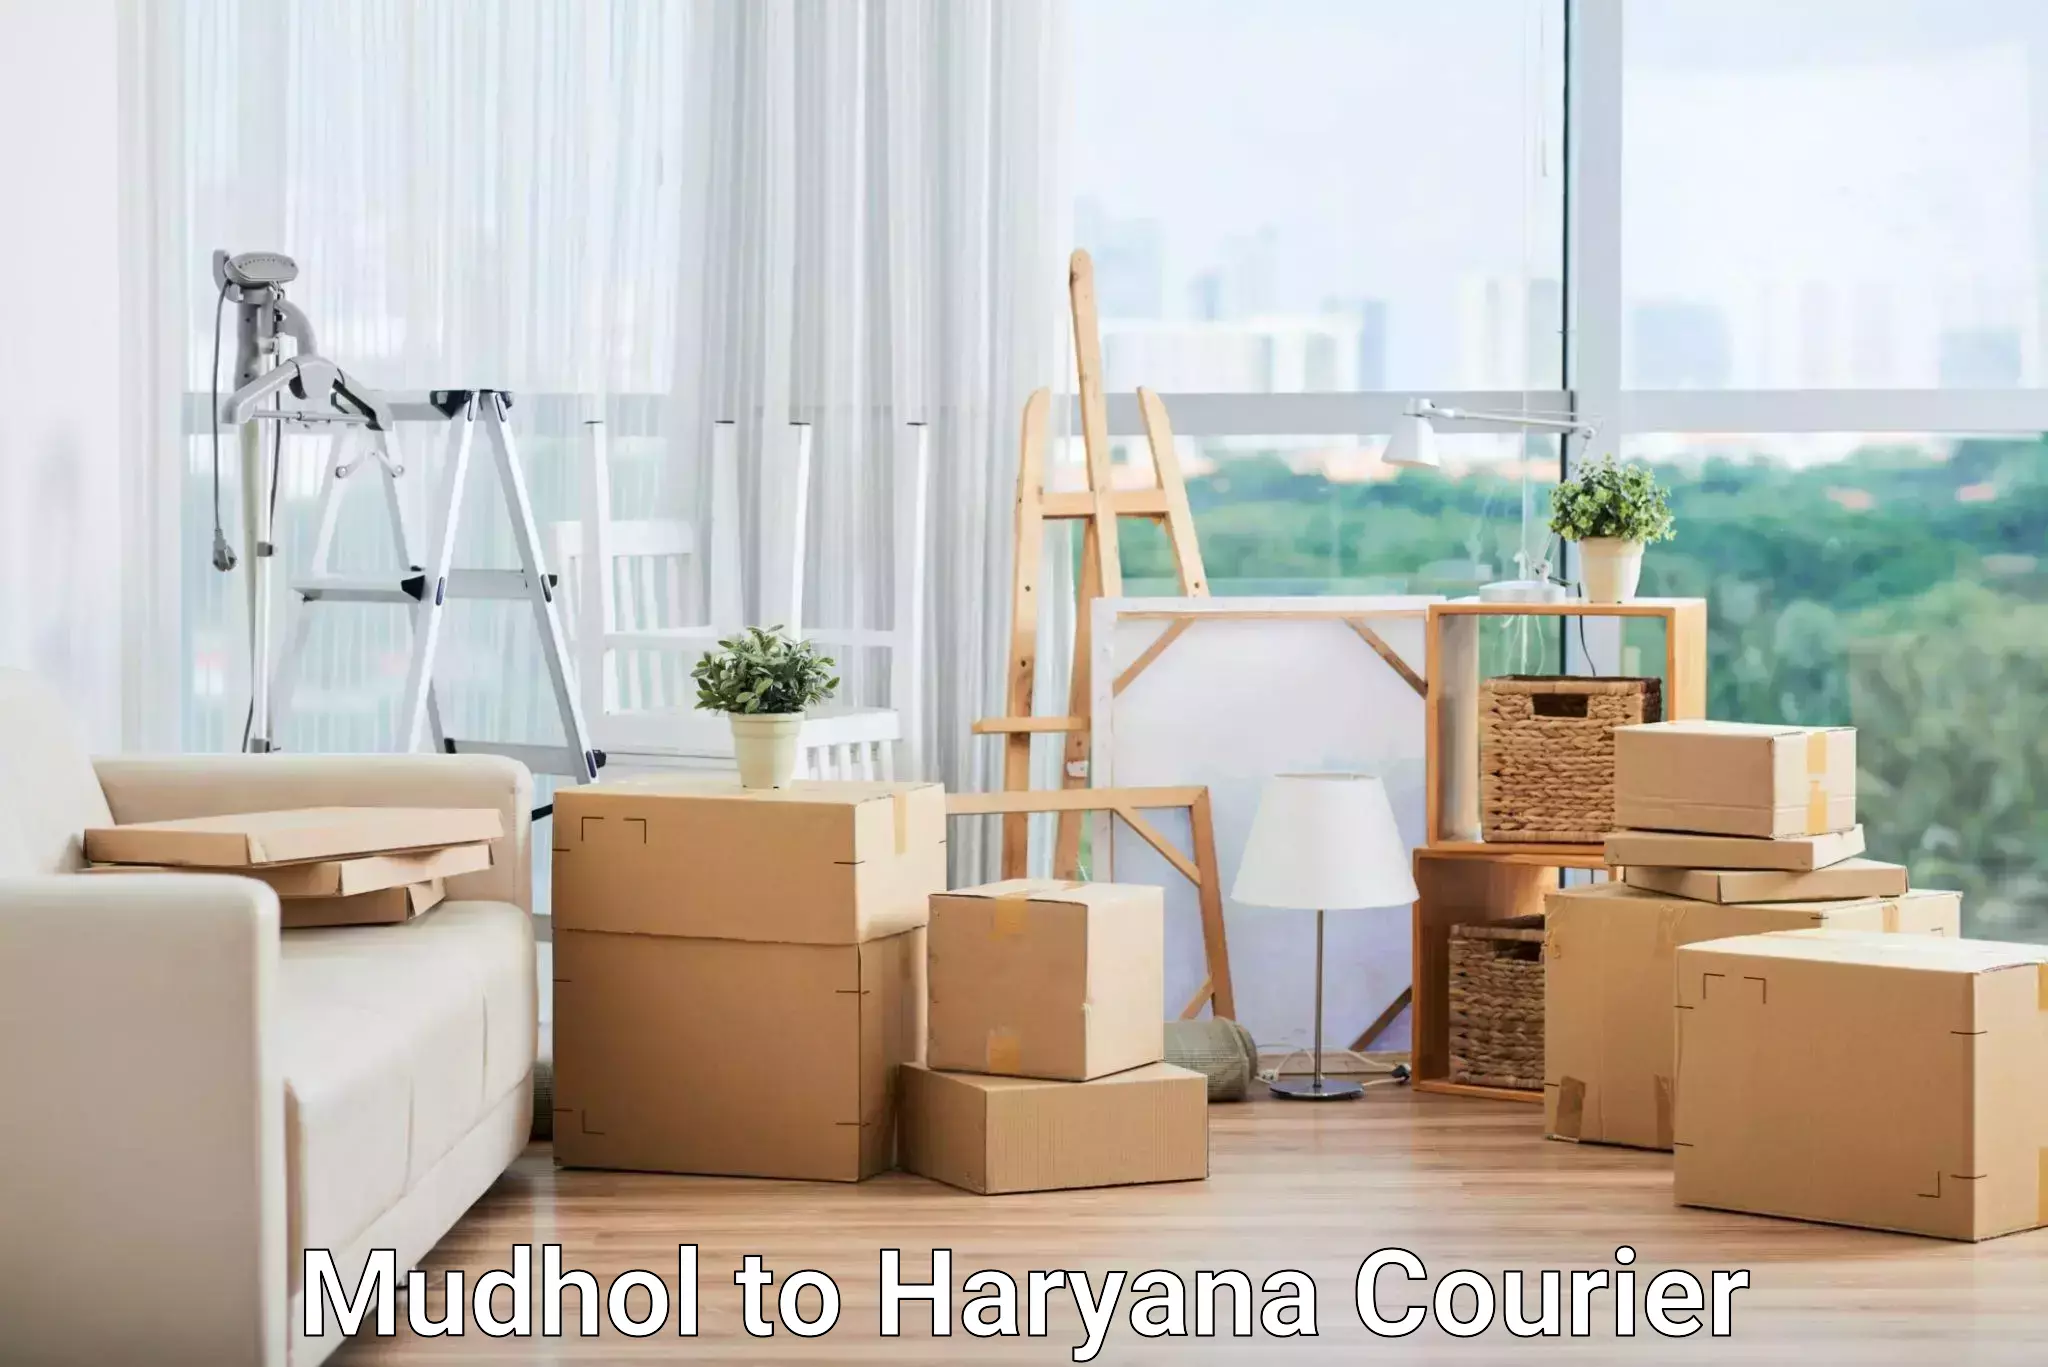 Local delivery service Mudhol to Haryana